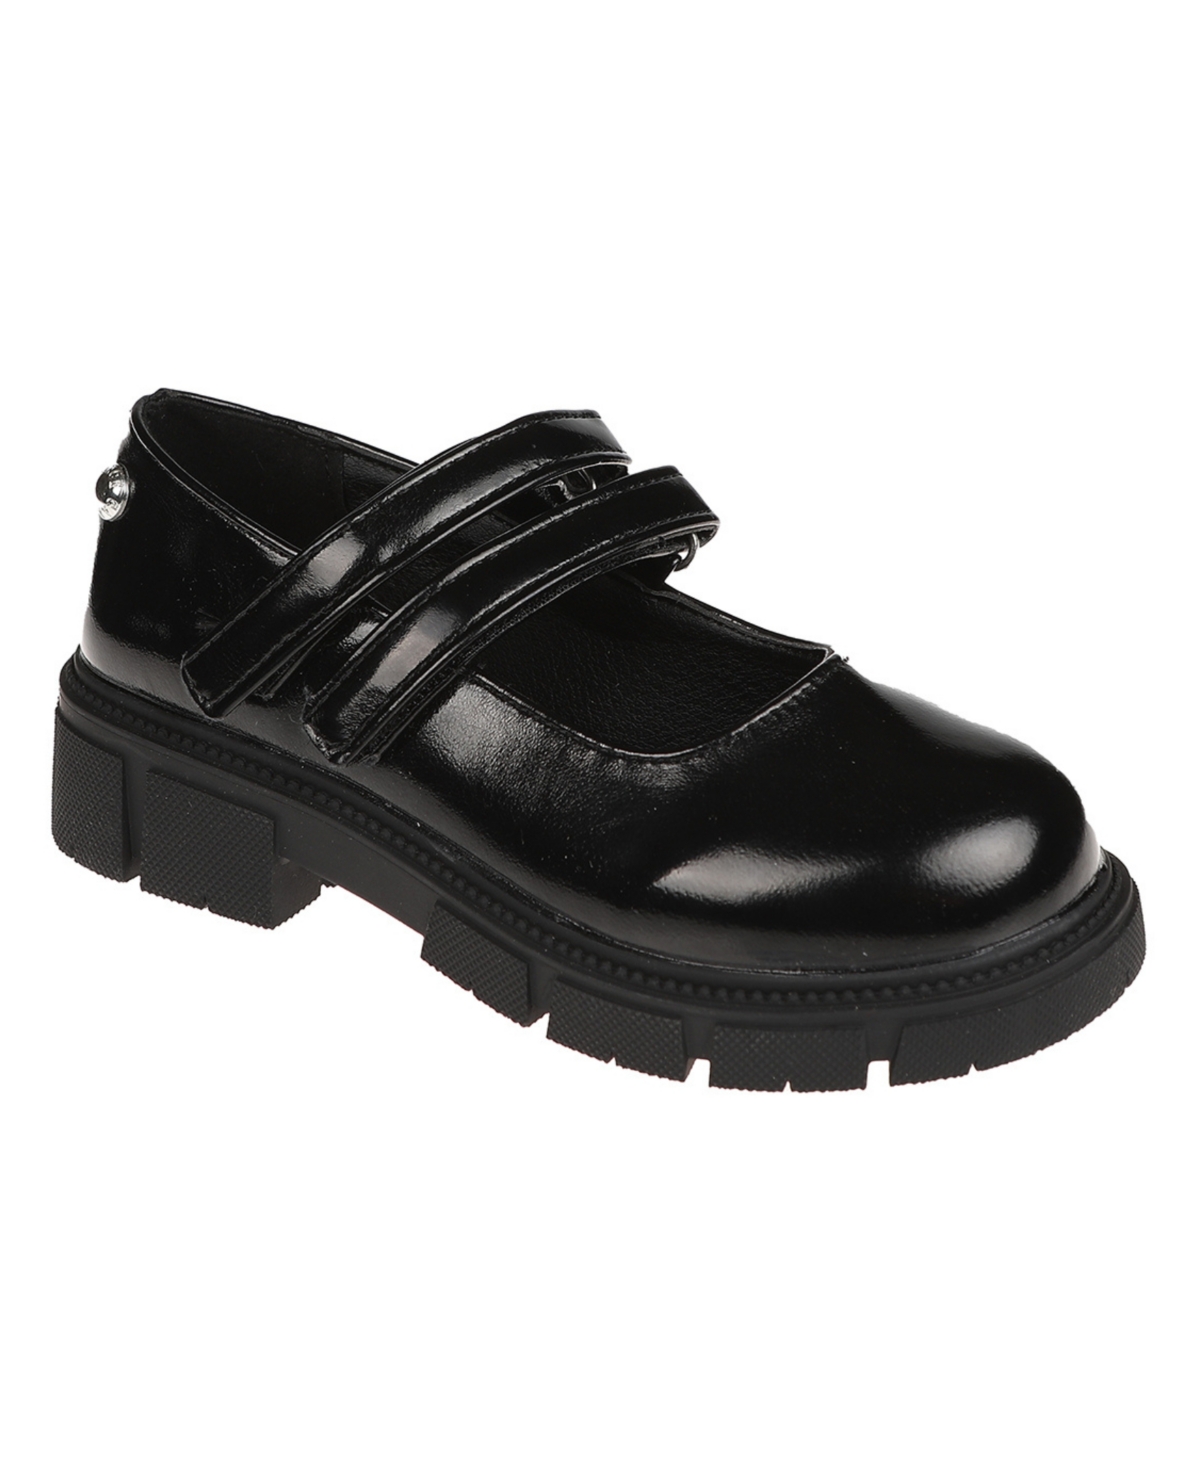 VINCE CAMUTO BIG GIRLS MARY JANE LOAFERS PATENT SCHOOL UNIFORM DRESS SHOES